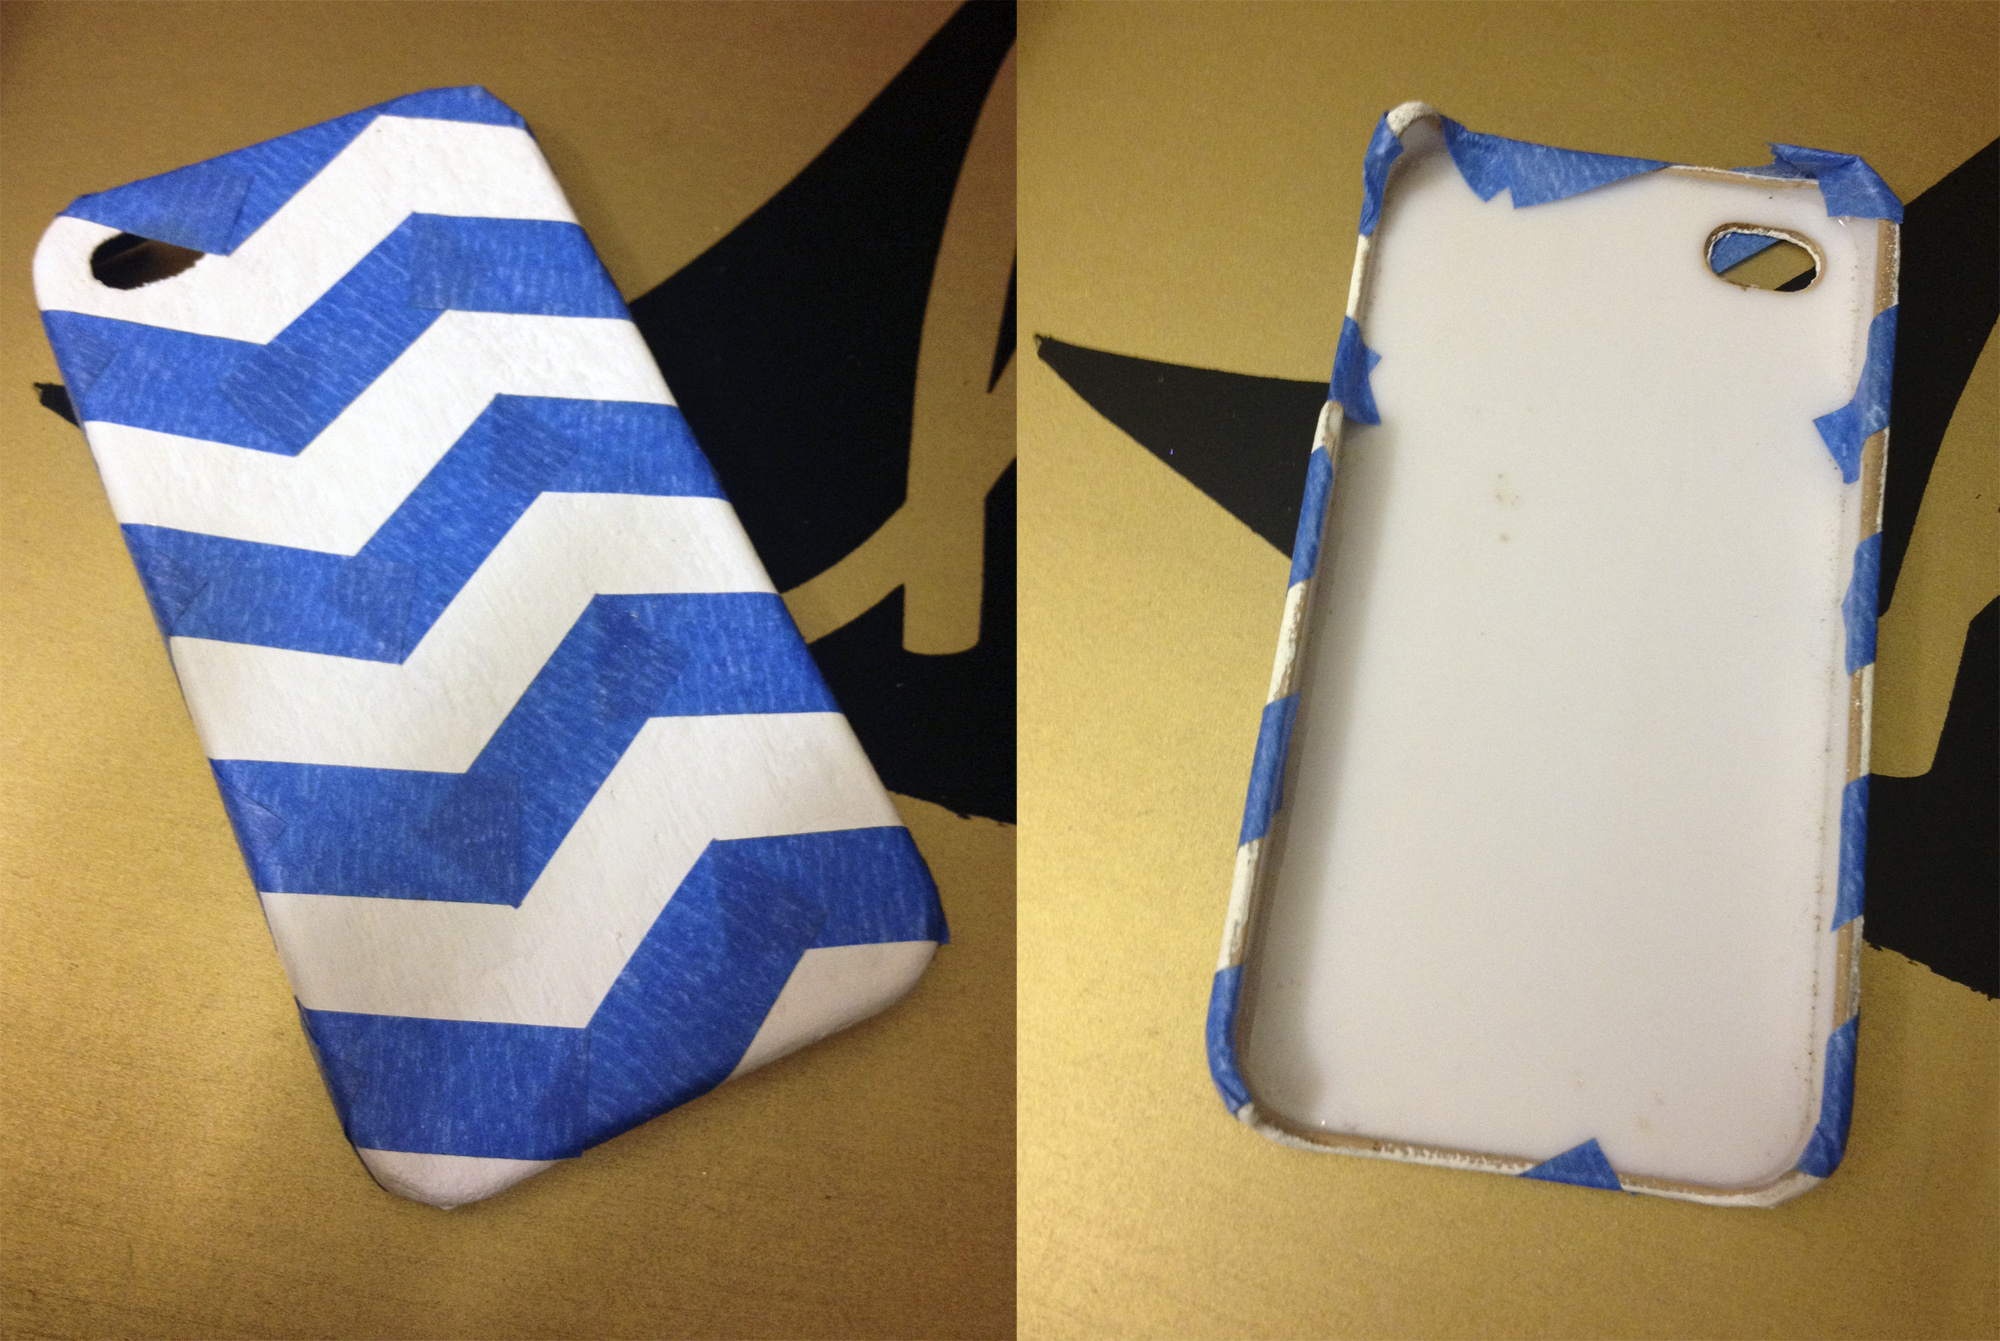 phone case makeover - tape off a chevron pattern